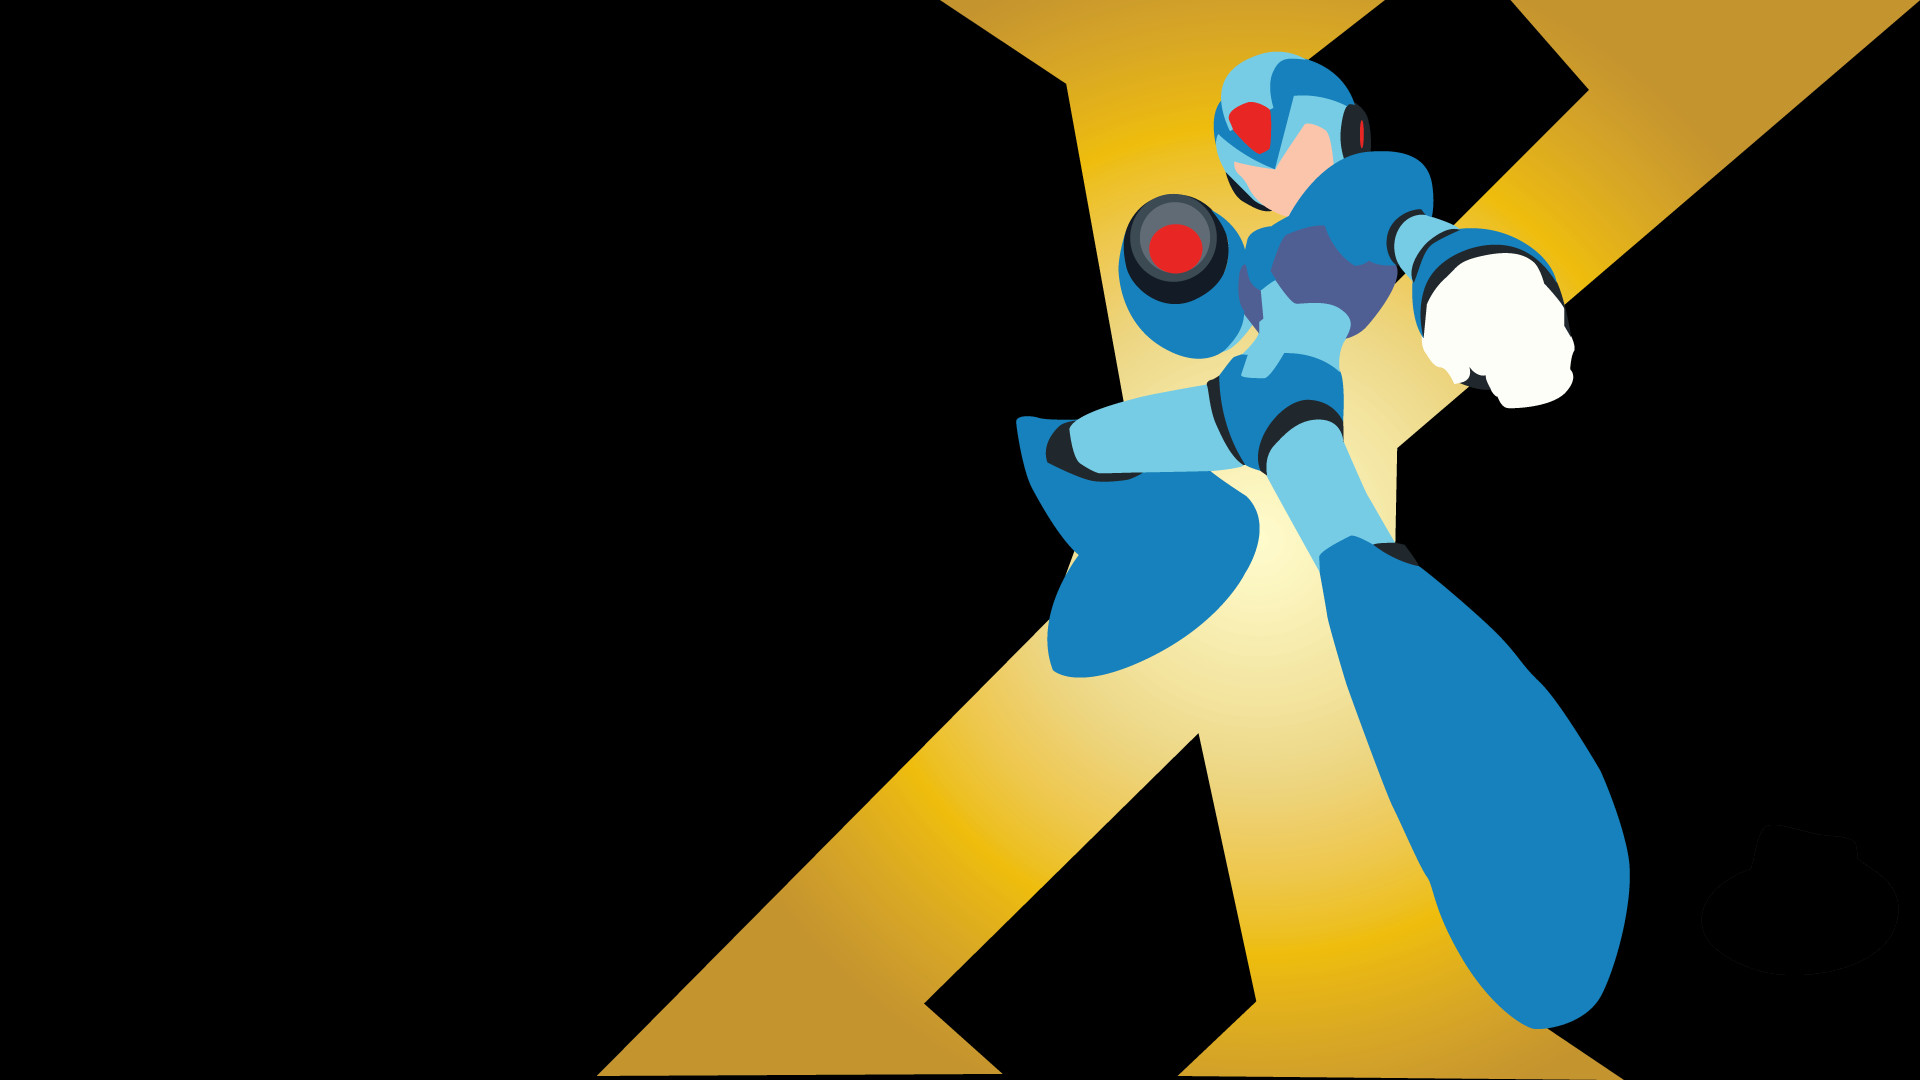 Explore More Wallpapers in the Mega Man X Subcategory!